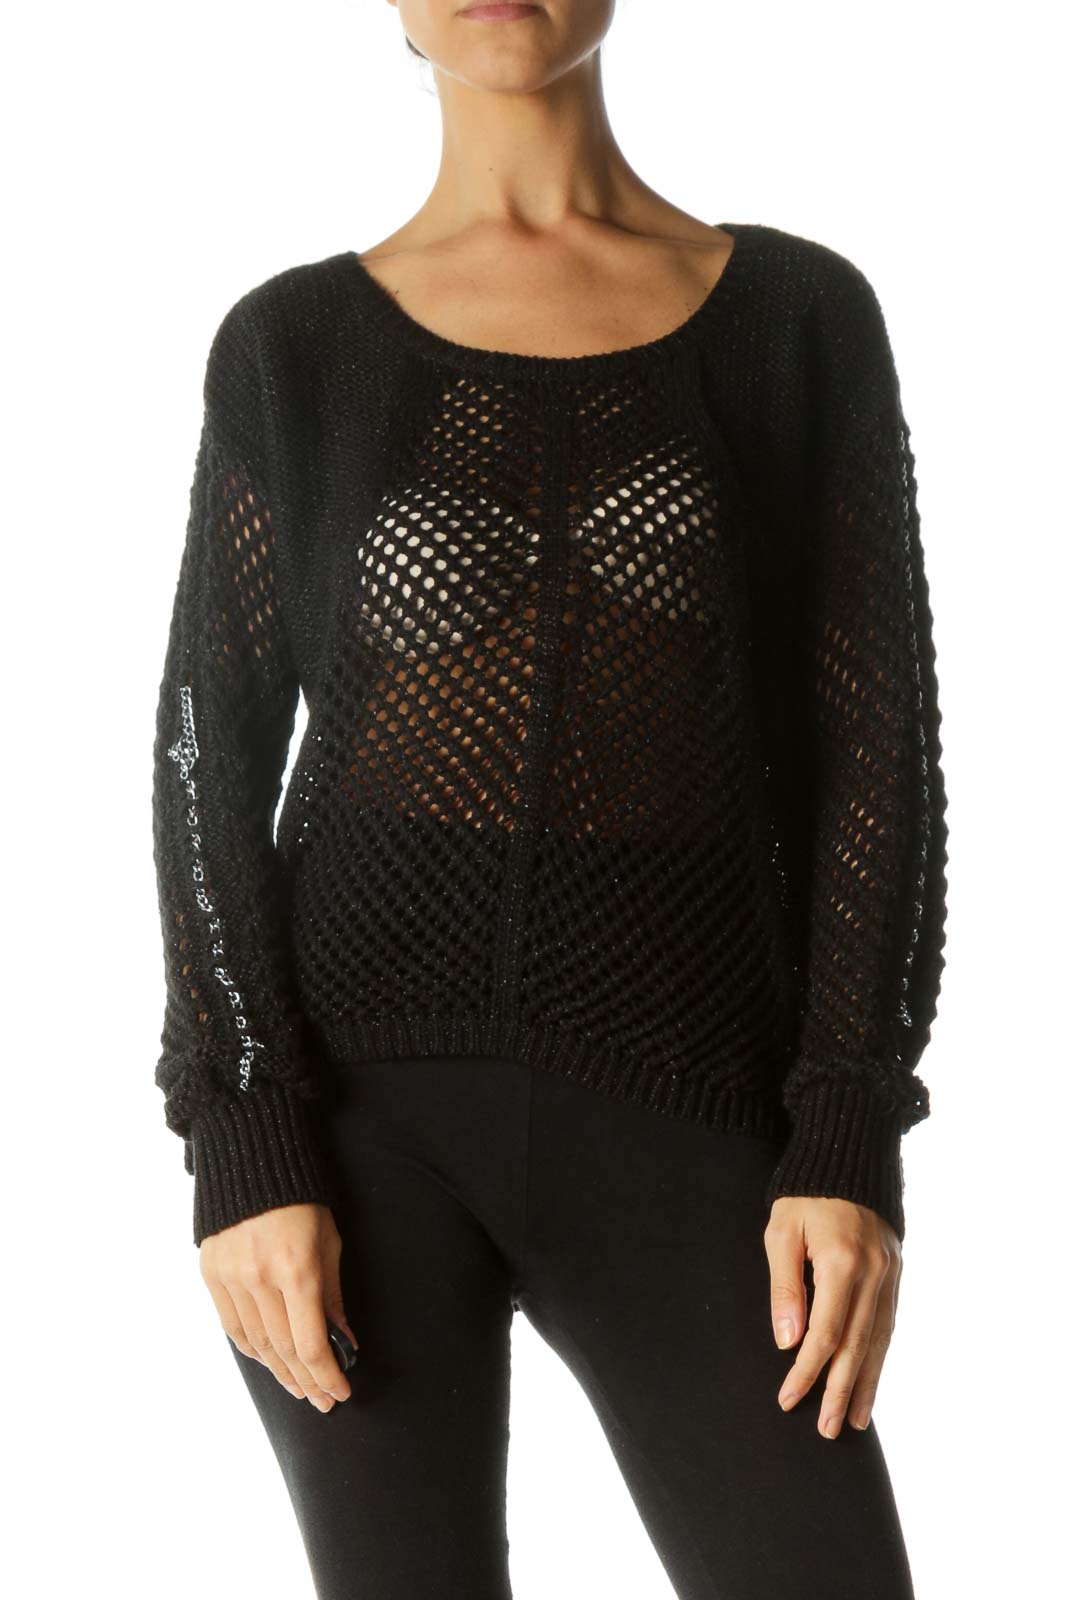 Black Silver Metallic Thread Soft-Touch Stretch Sleeve Chain Detail See-ThroughSweater Front